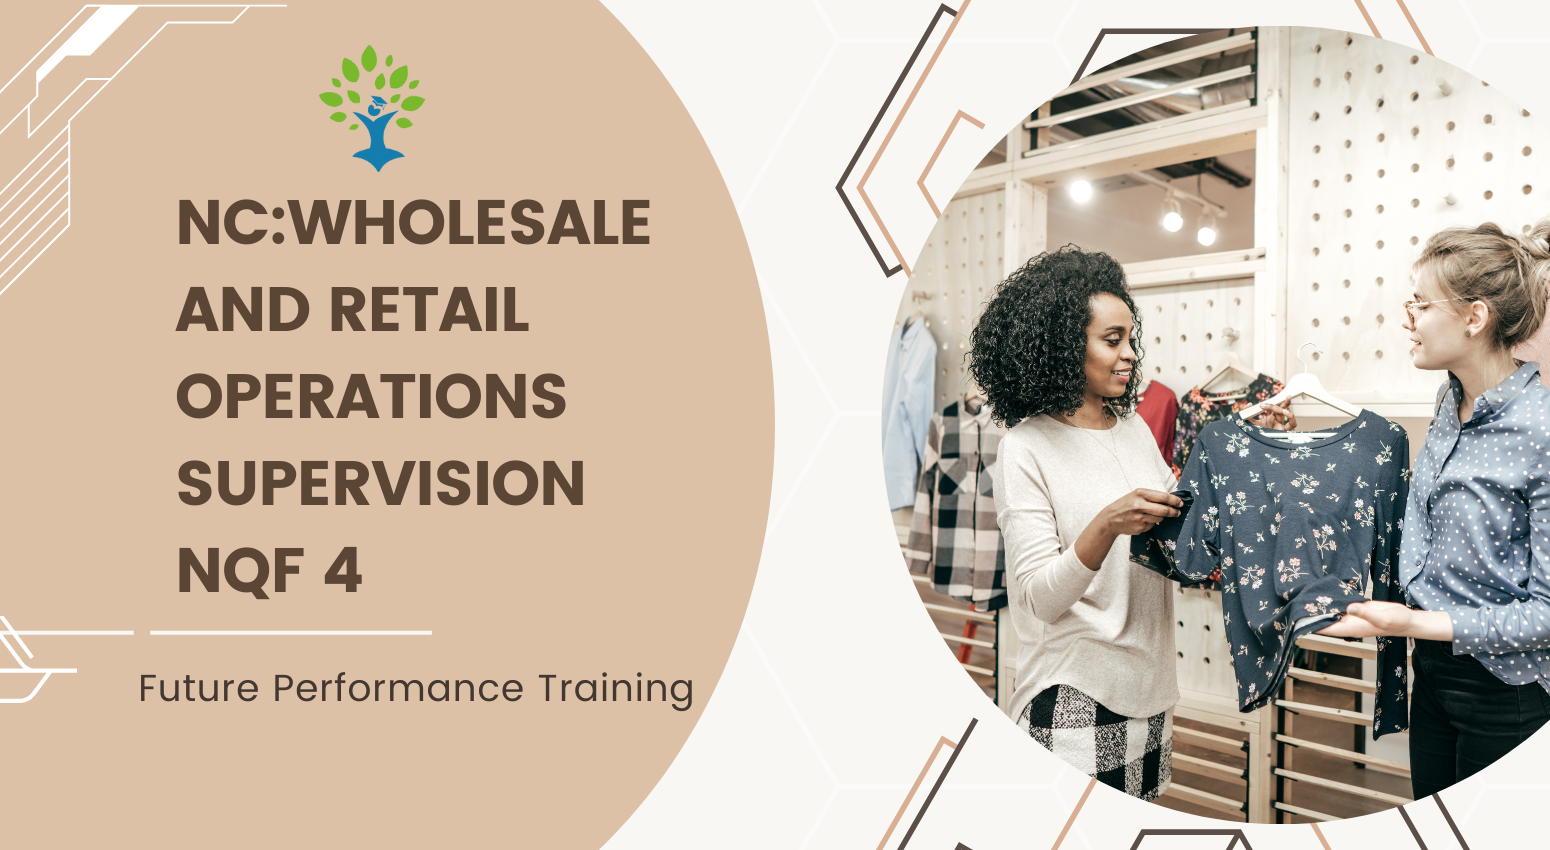 NC: Wholesale and Retail Operations Supervision NQF 4